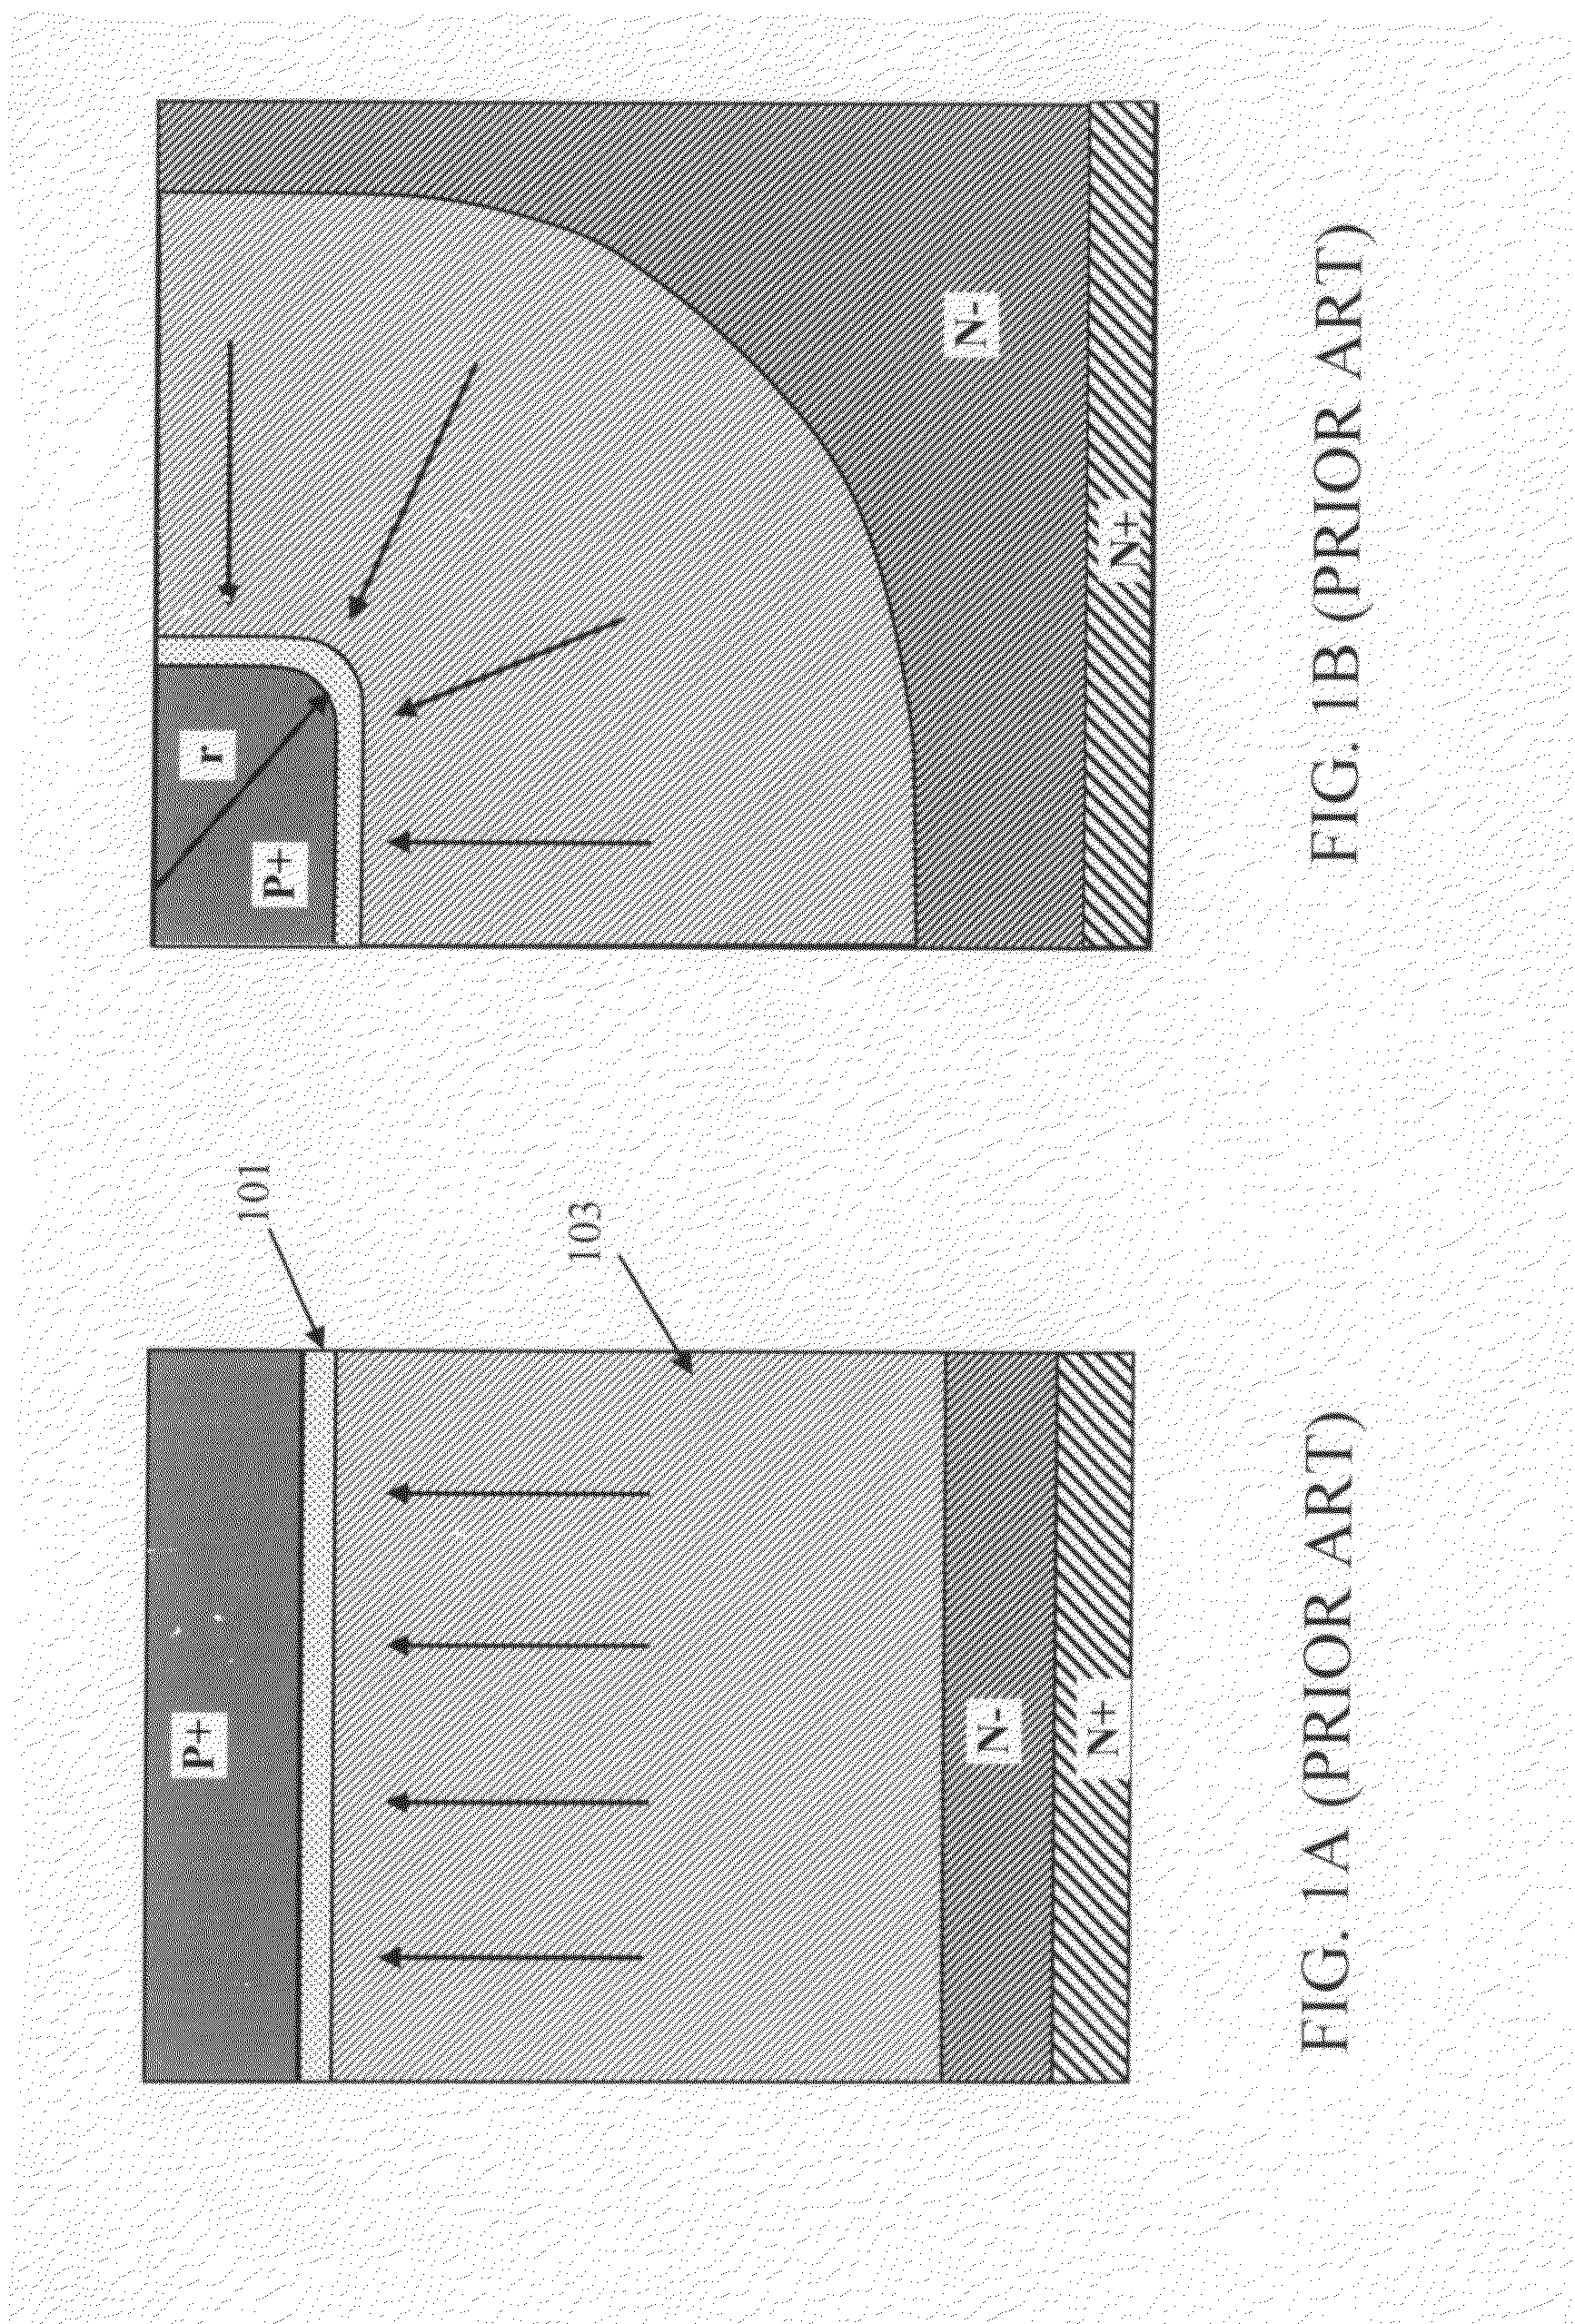 Configuration and method to generate saddle junction electric field in edge termination